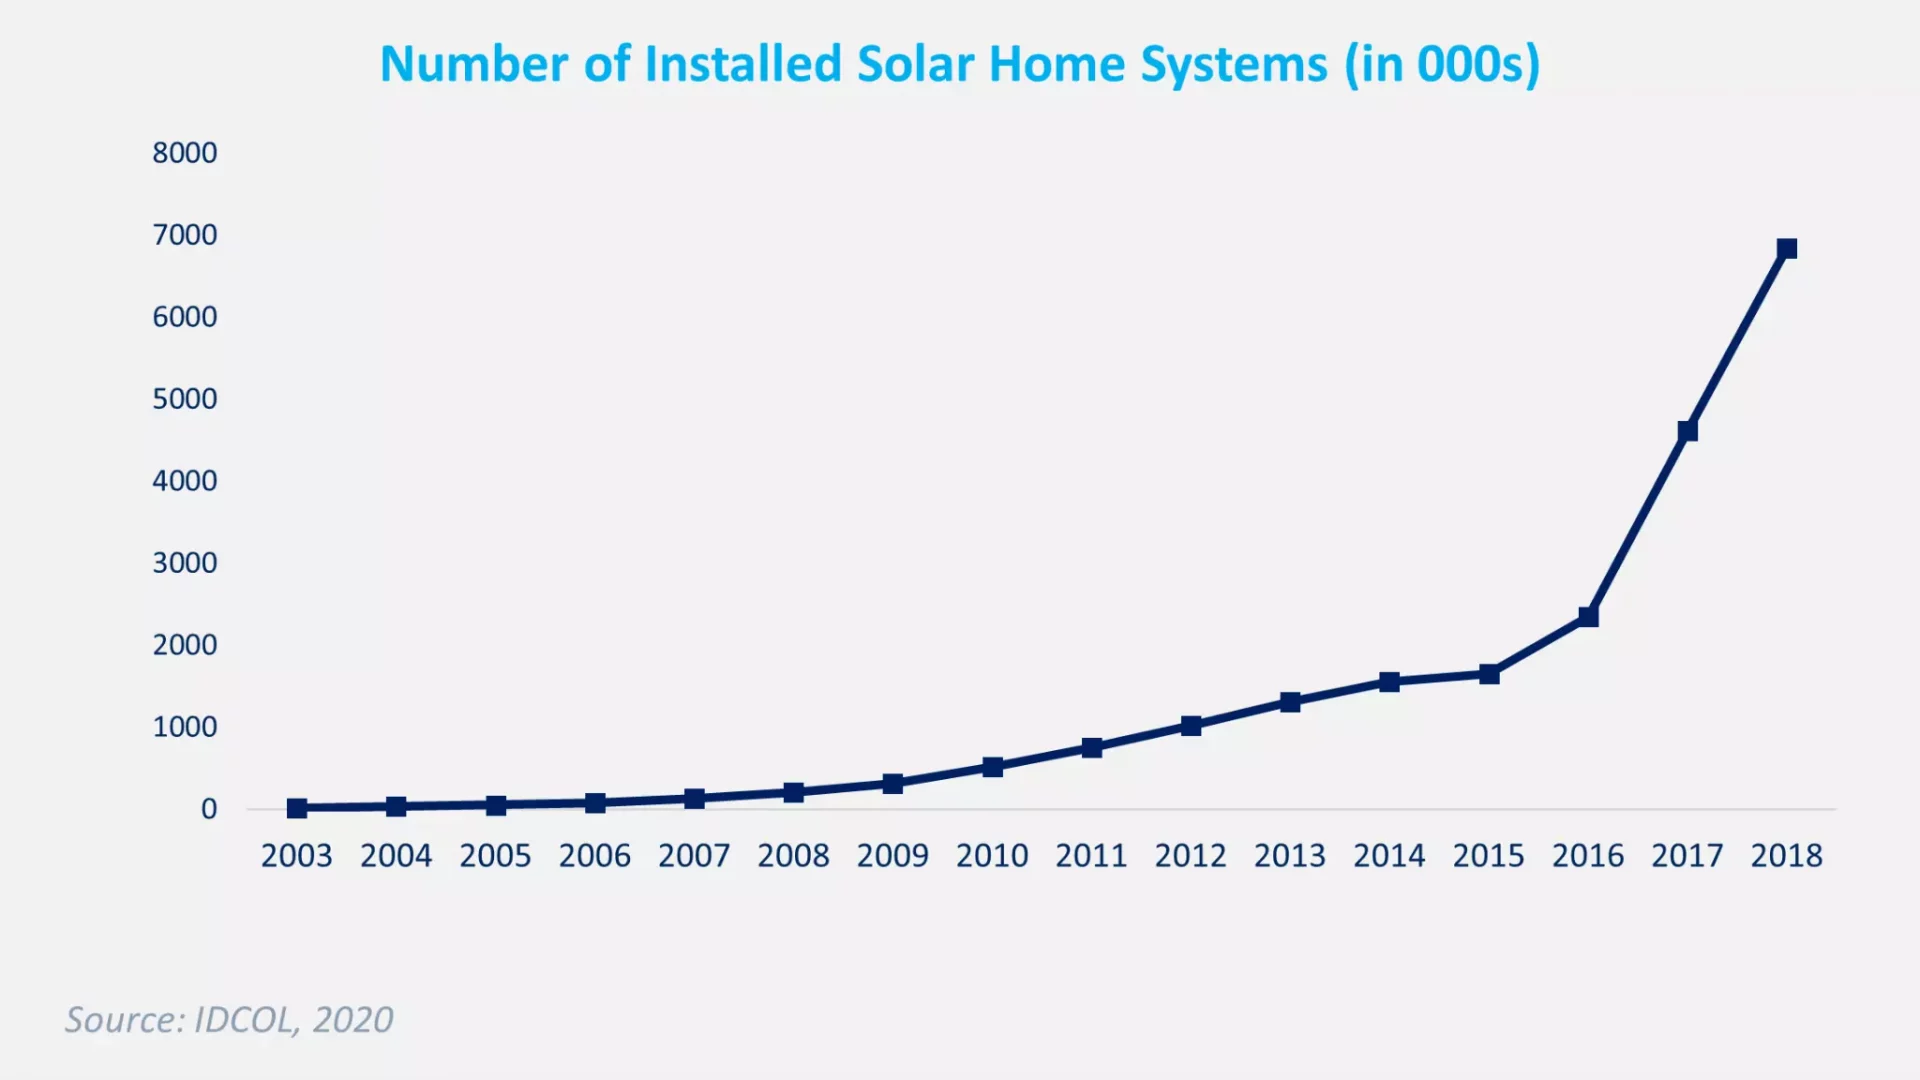 Number of Installed Solar Home Systems in Bangladesh